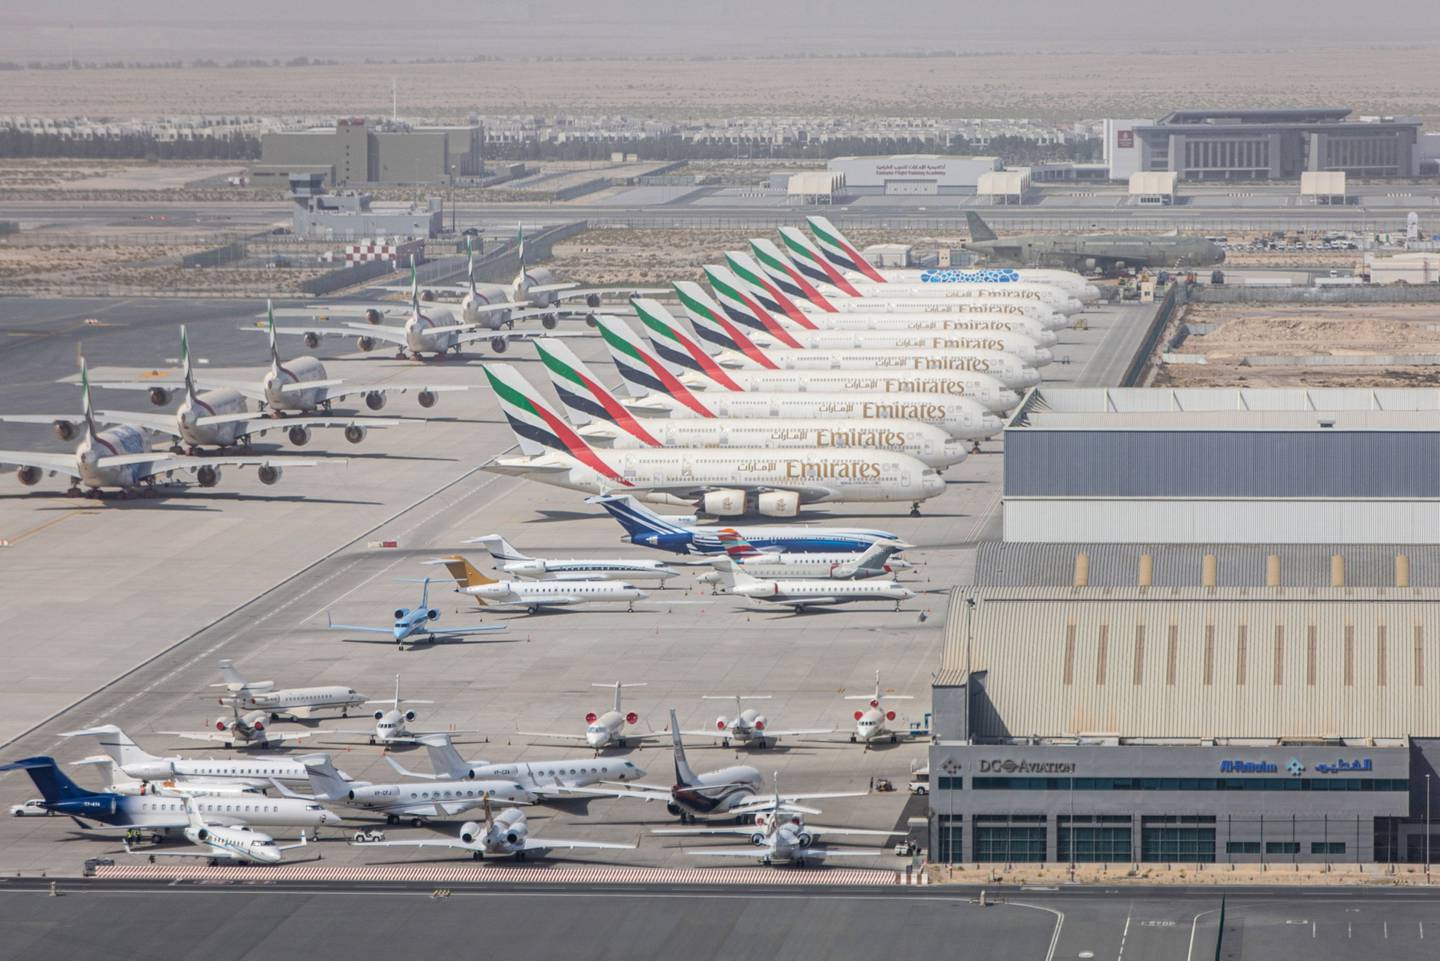 Emirates will operate 31 extra flights to Jeddah, as well as double daily flights to Madinah. Bloomberg